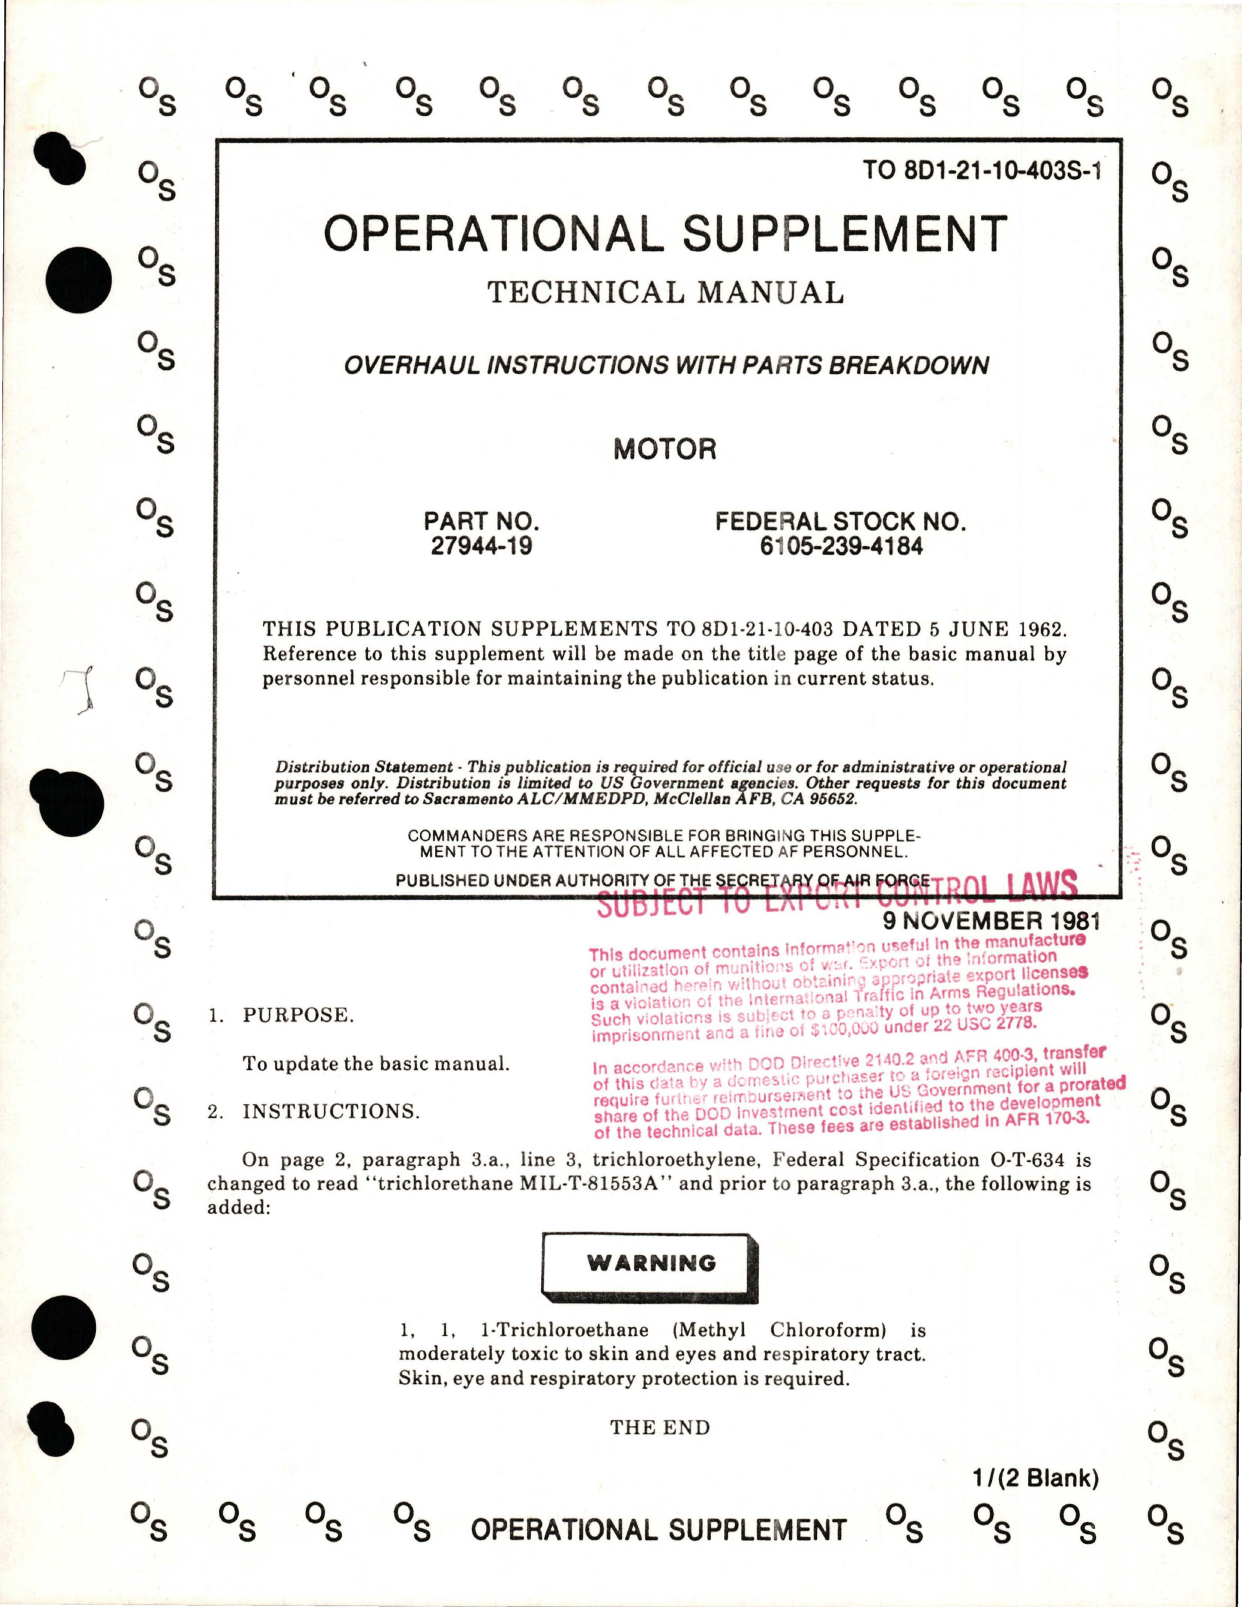 Sample page 1 from AirCorps Library document: Operational Supplement to Overhaul Instructions with Parts Breakdown for Motor - Part 27944-19 